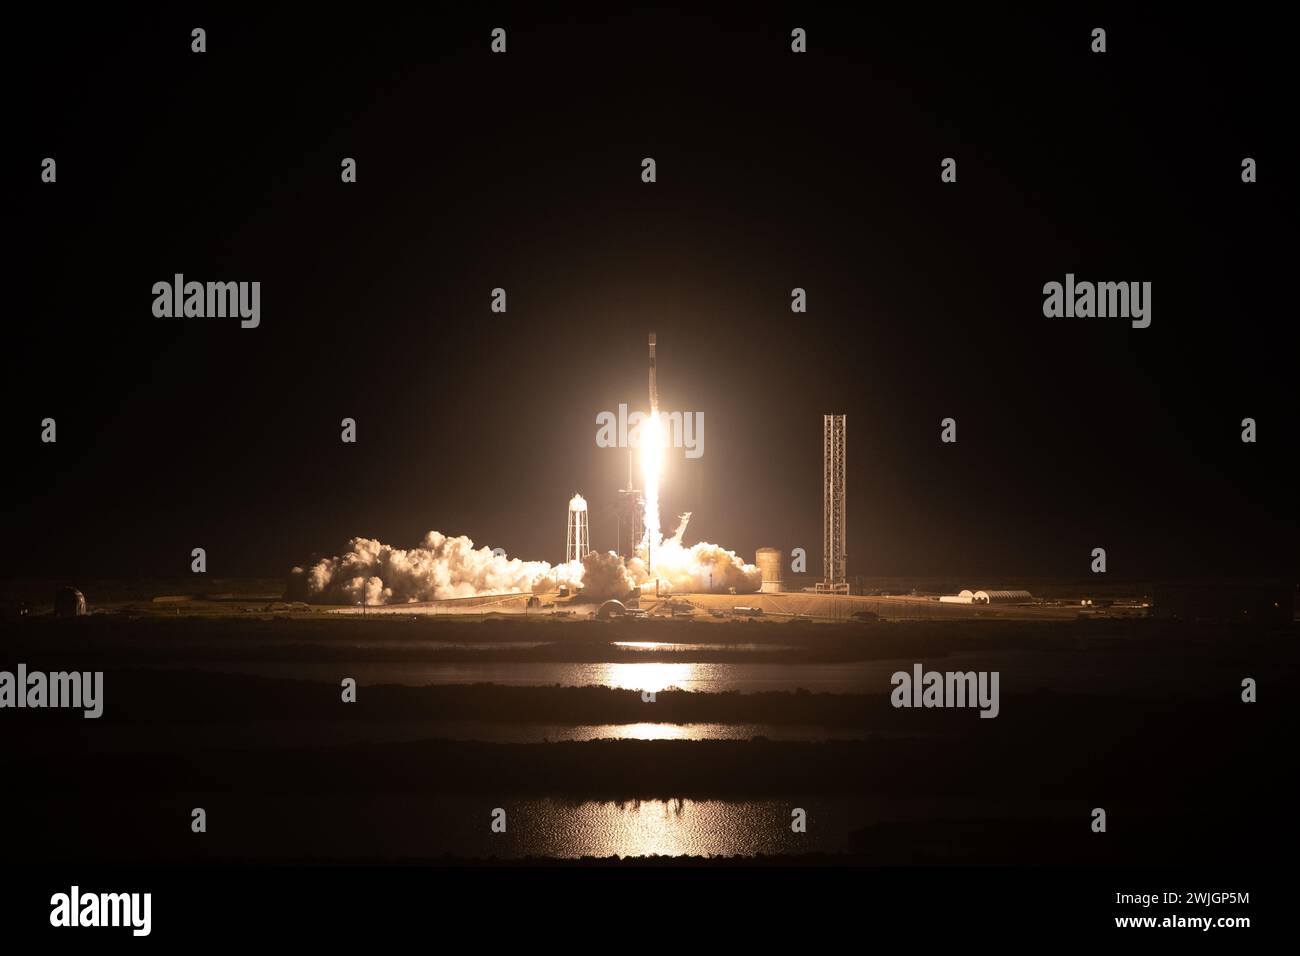 Cape Canaveral, United States of America. 15 February, 2024. A SpaceX Falcon 9 rocket carrying Intuitive Machines' Nova-C lunar lander blasts off from Launch Pad 39A at the Kennedy Space Center, February 15, 2024 in Cape Canaveral, Florida. This is the first commercial mission to the moon for the NASA Artemis program. Credit: Kim Shiflett/NASA/Alamy Live News Stock Photo